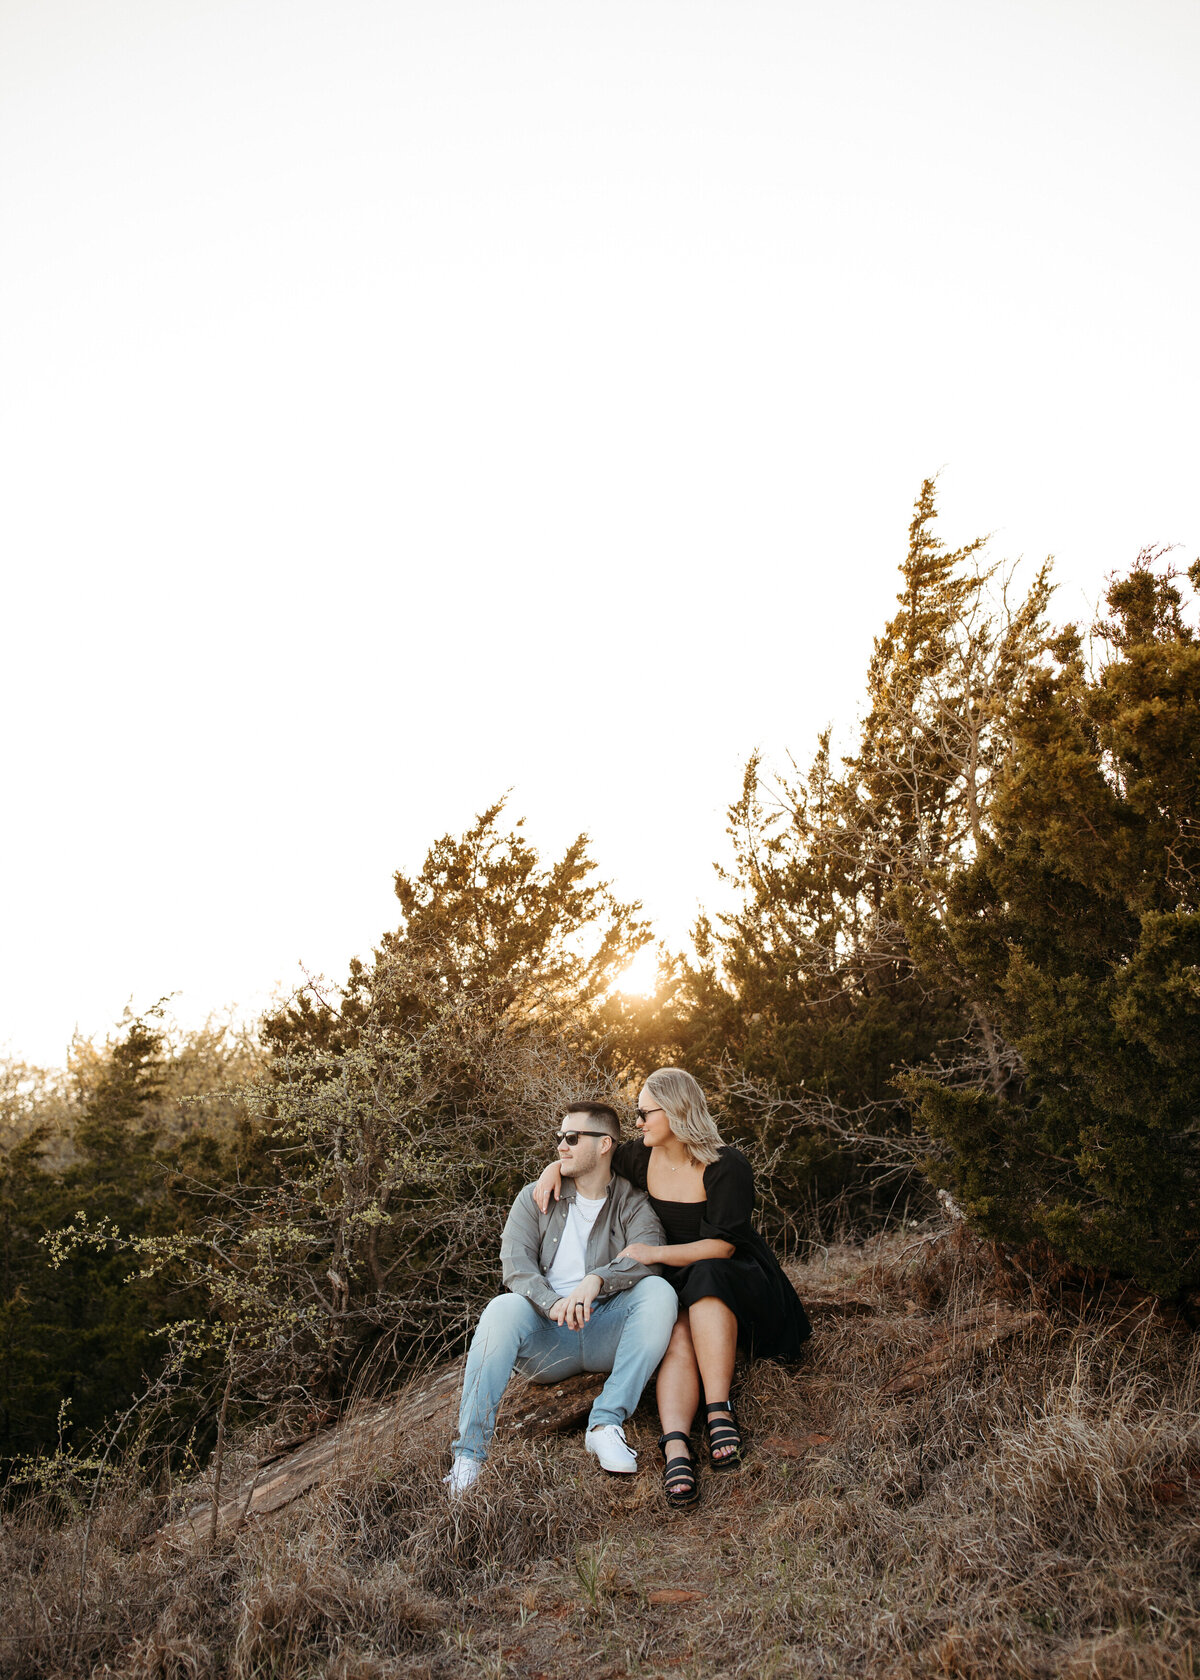 A couple seated on a hillside at dusk, enjoying the peace of the sunset